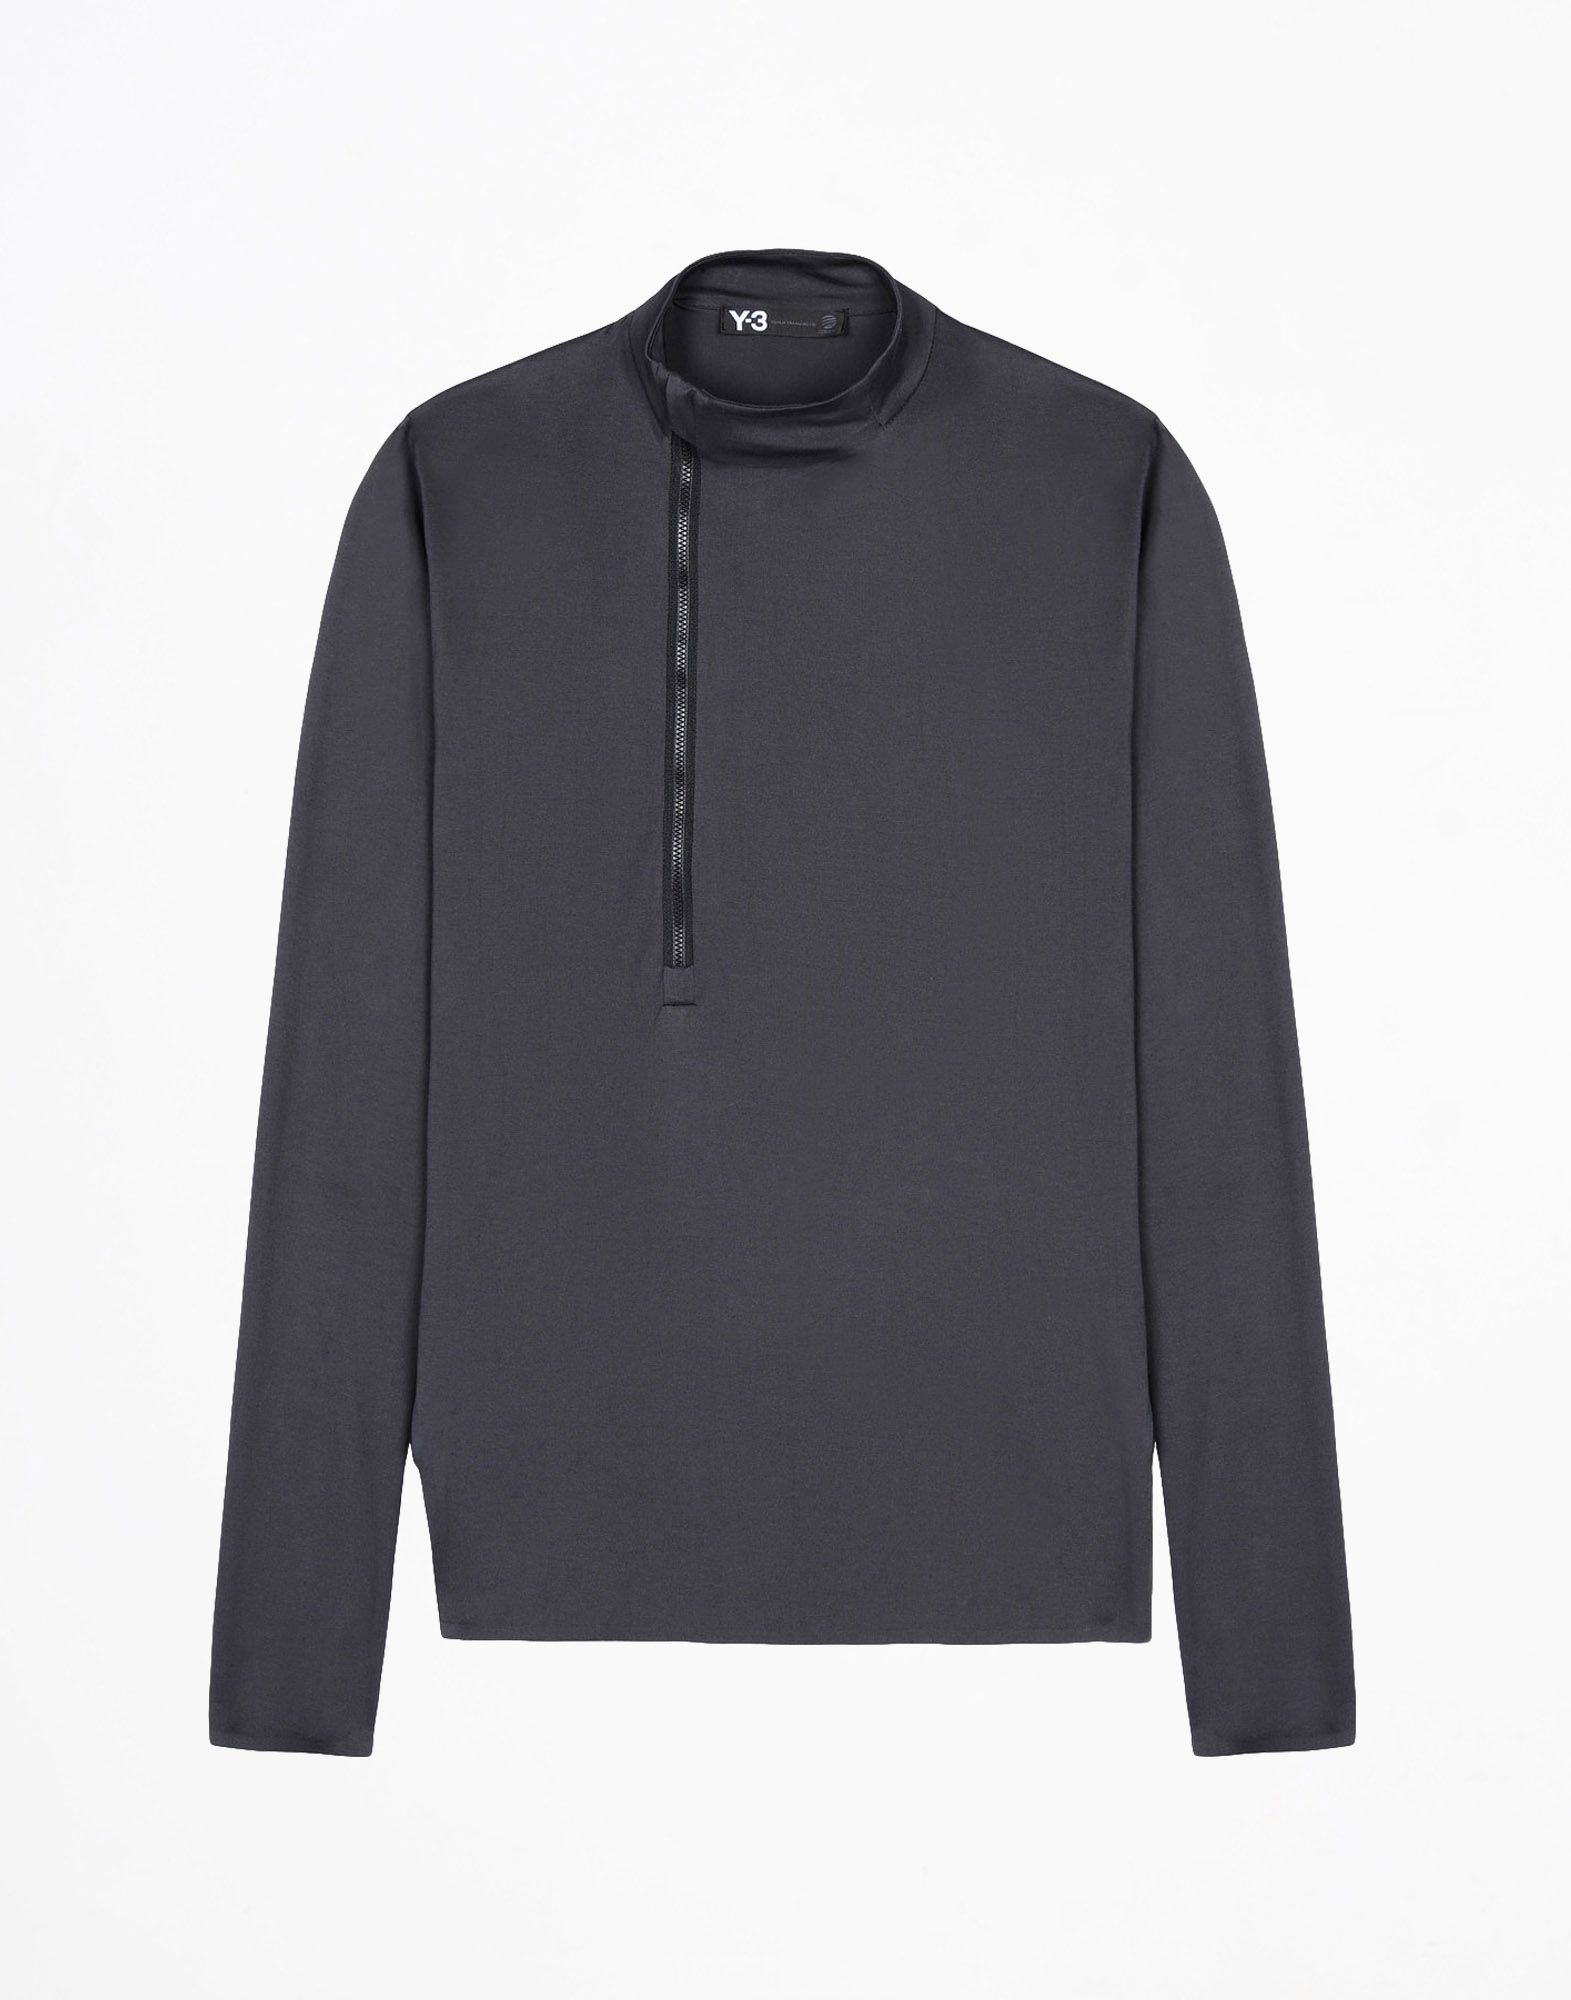 Y 3 ZIP LONG SLEEVE for Men | Adidas Y-3 Official Store